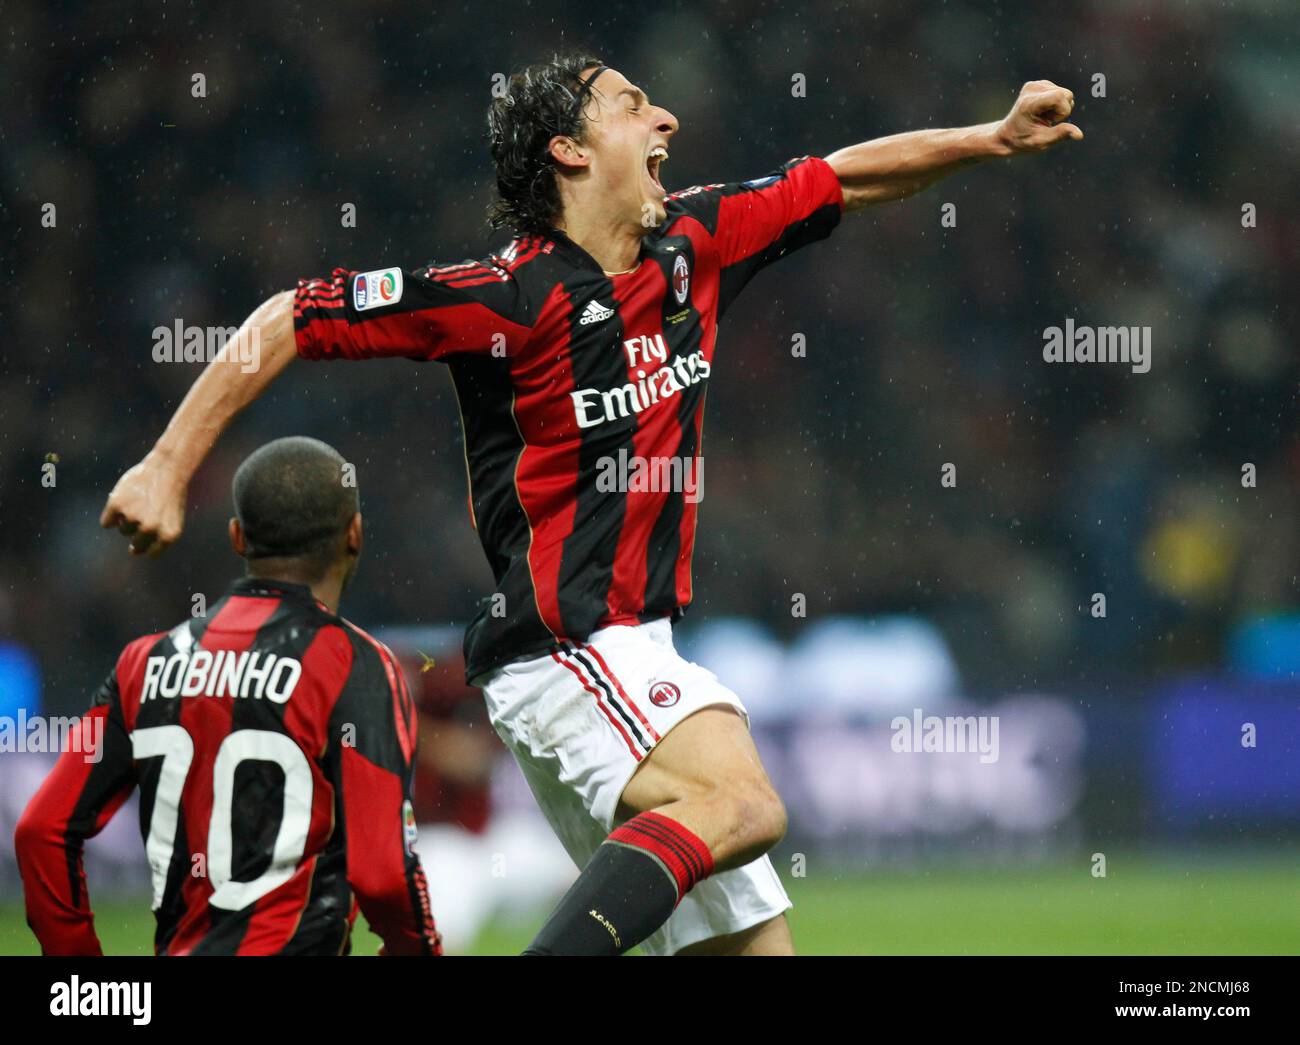 AC Milan forward Zlatan Ibrahimovic of Sweden, right, celebrates with his  teammate Brazilian forward Robinho after scoring during a Serie A soccer  match between AC Milan and Fiorentina at the San Siro